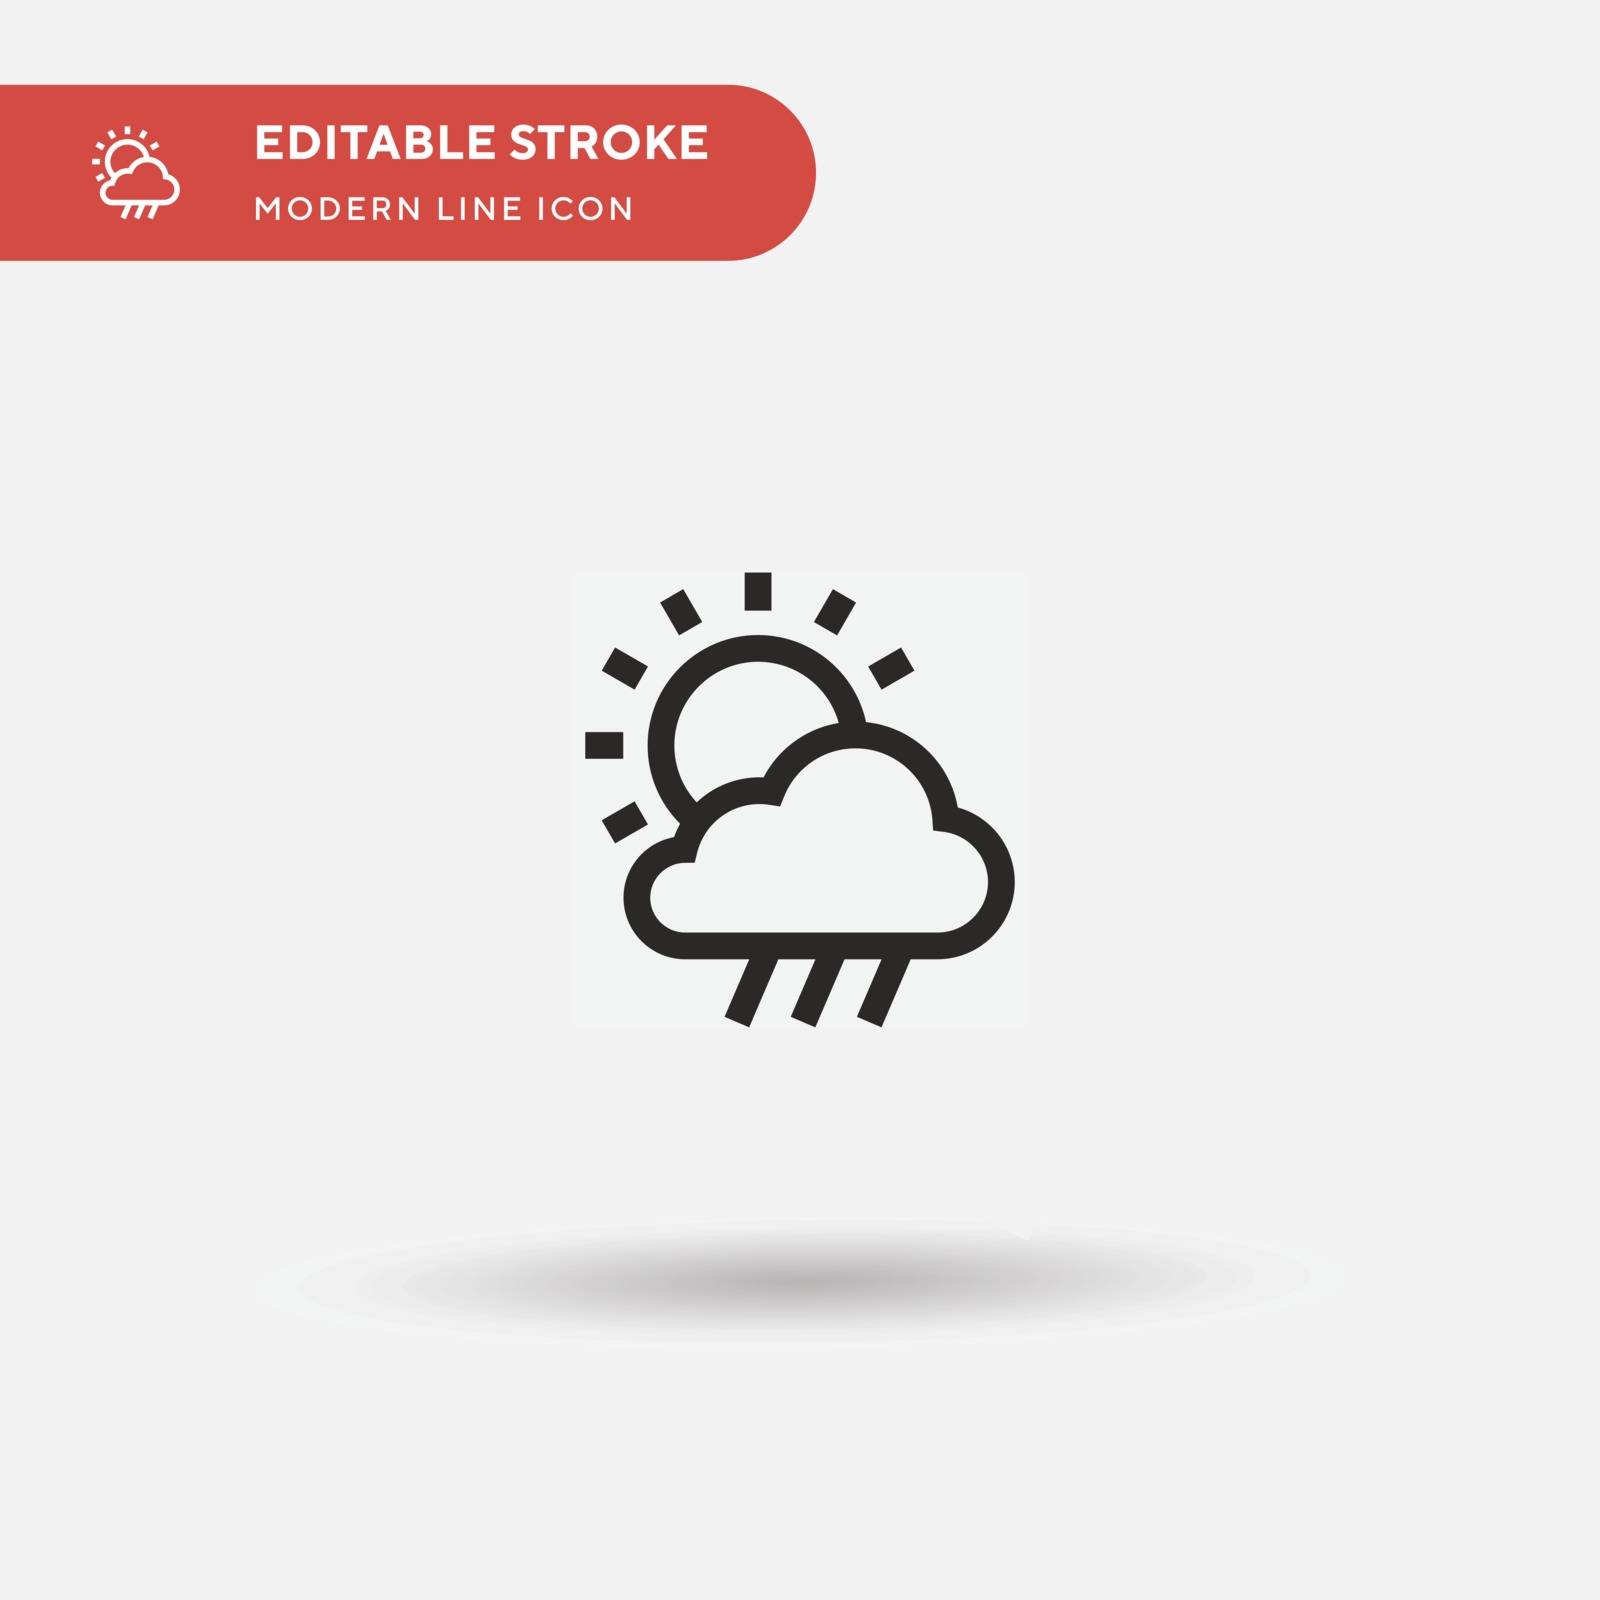 Rainy Day Simple vector icon. Illustration symbol design templat by guapoo